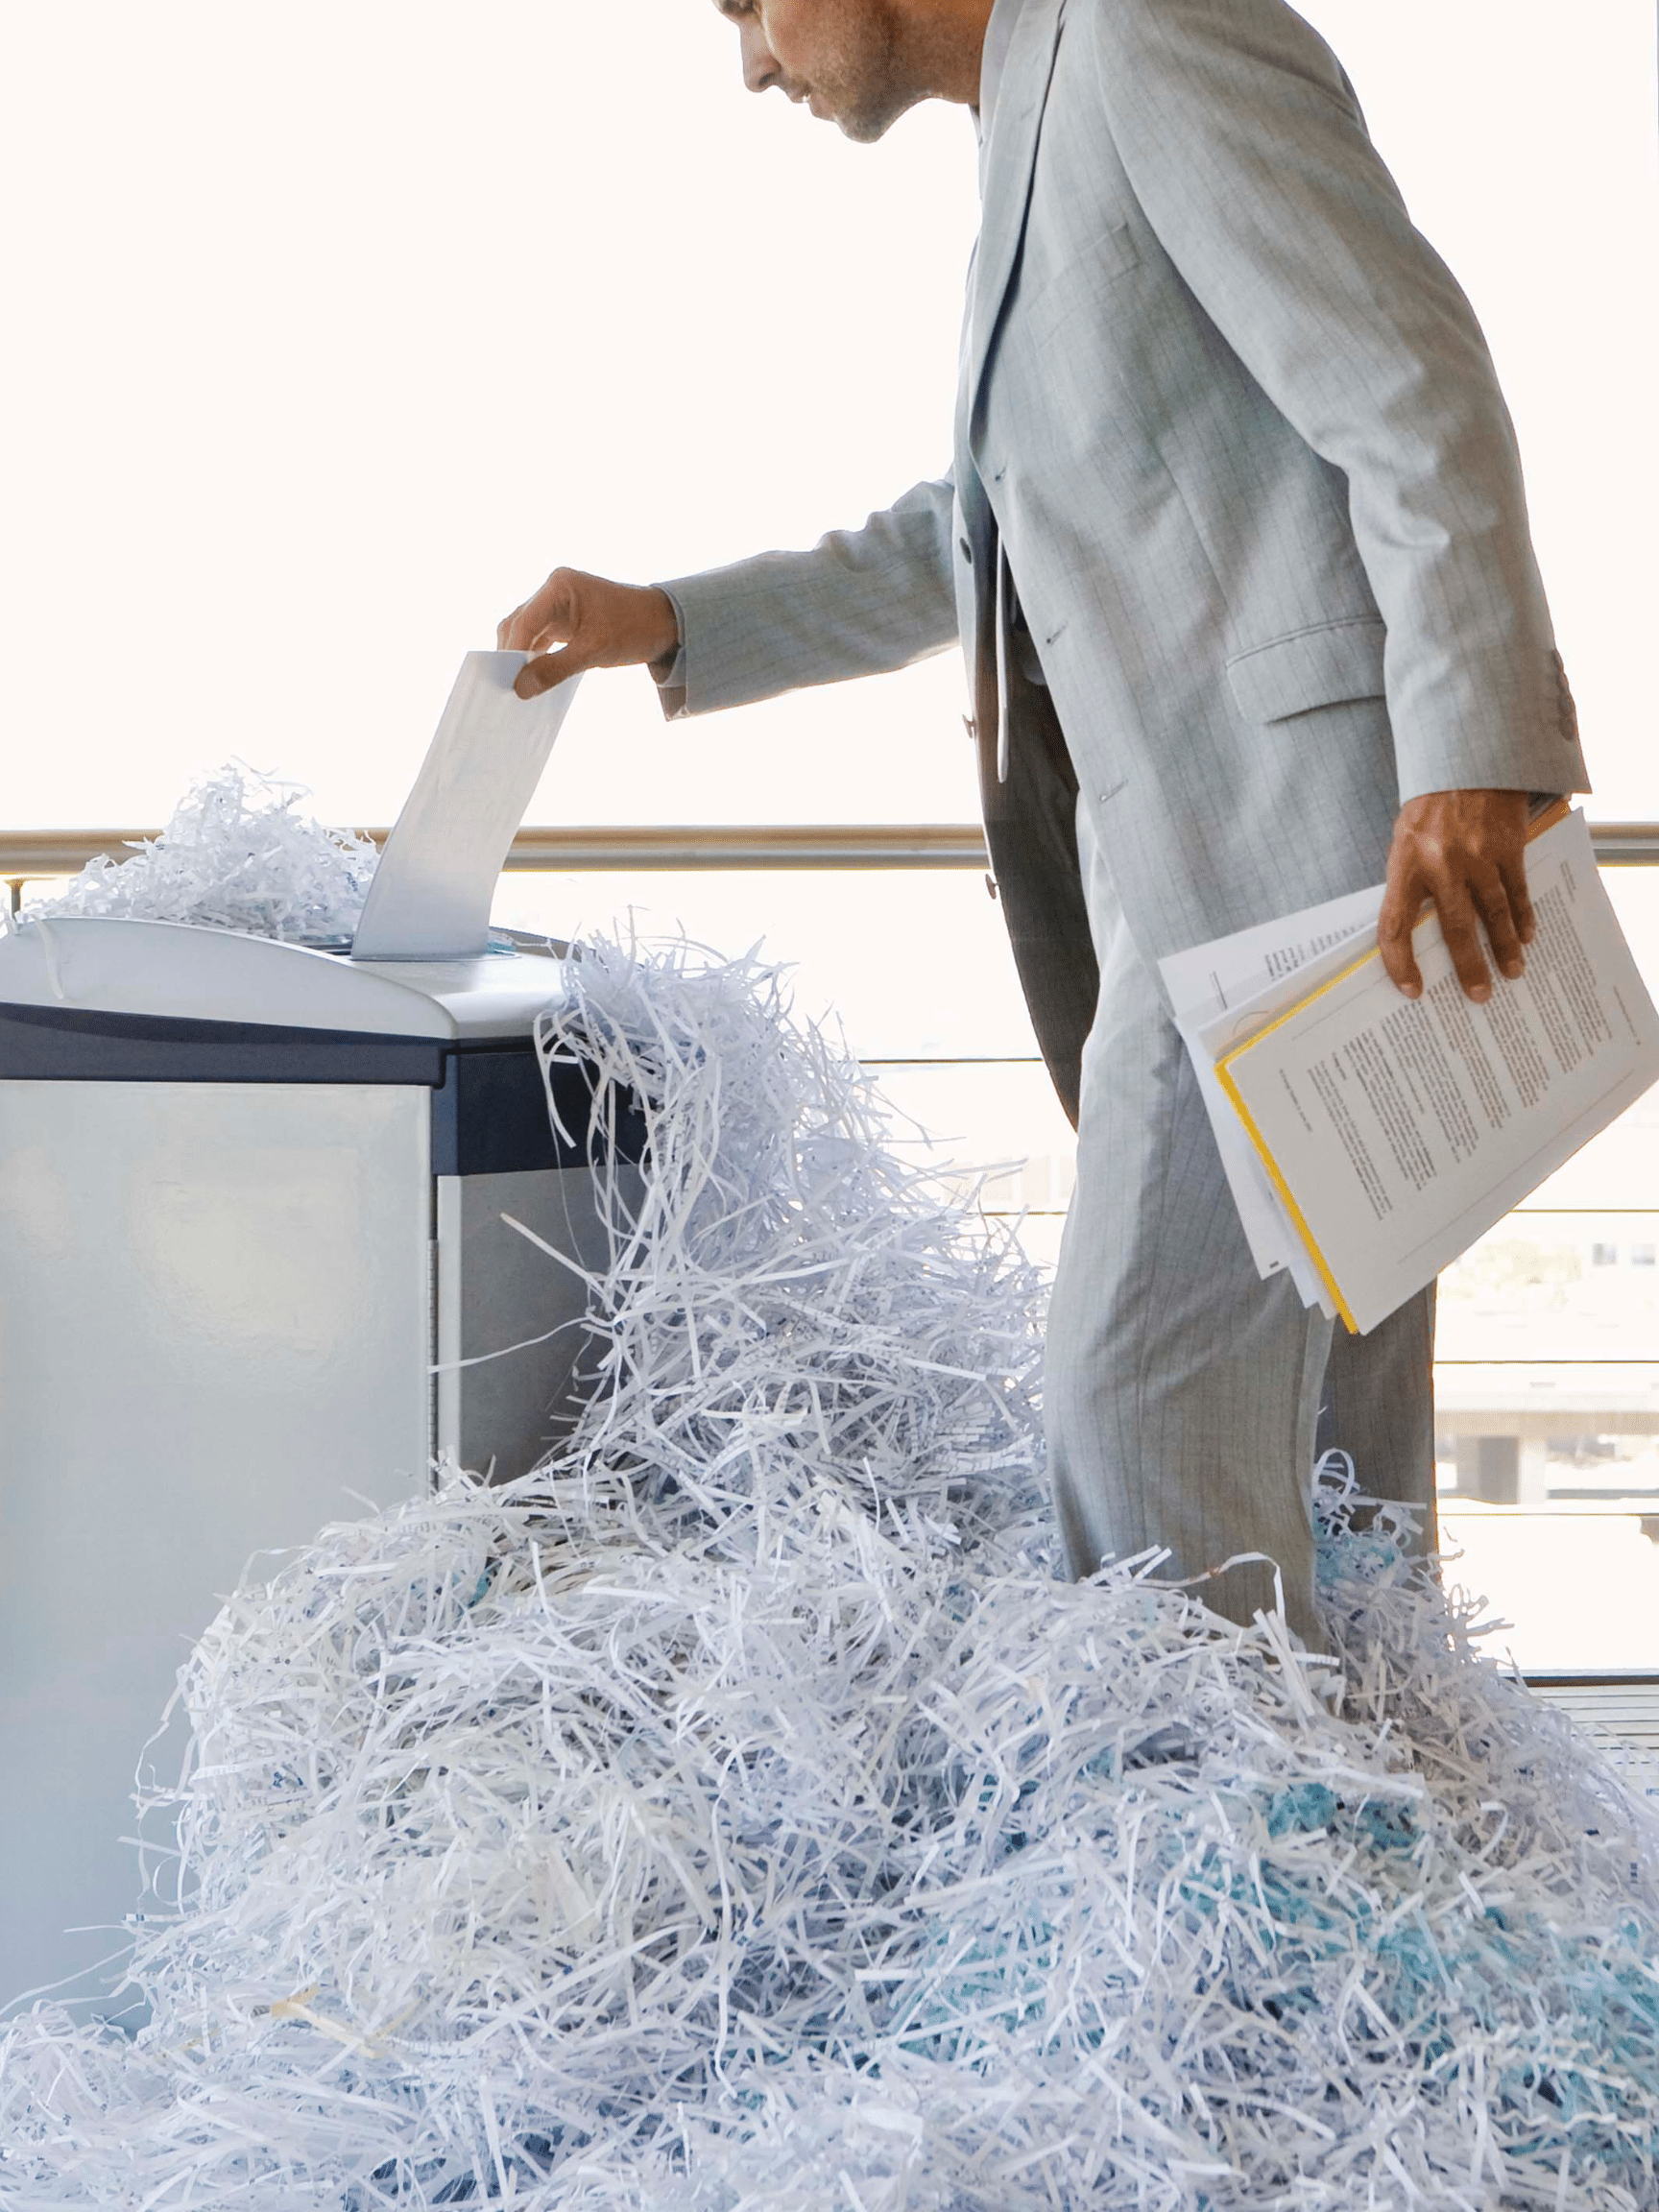 The Truth about owing your own shredder